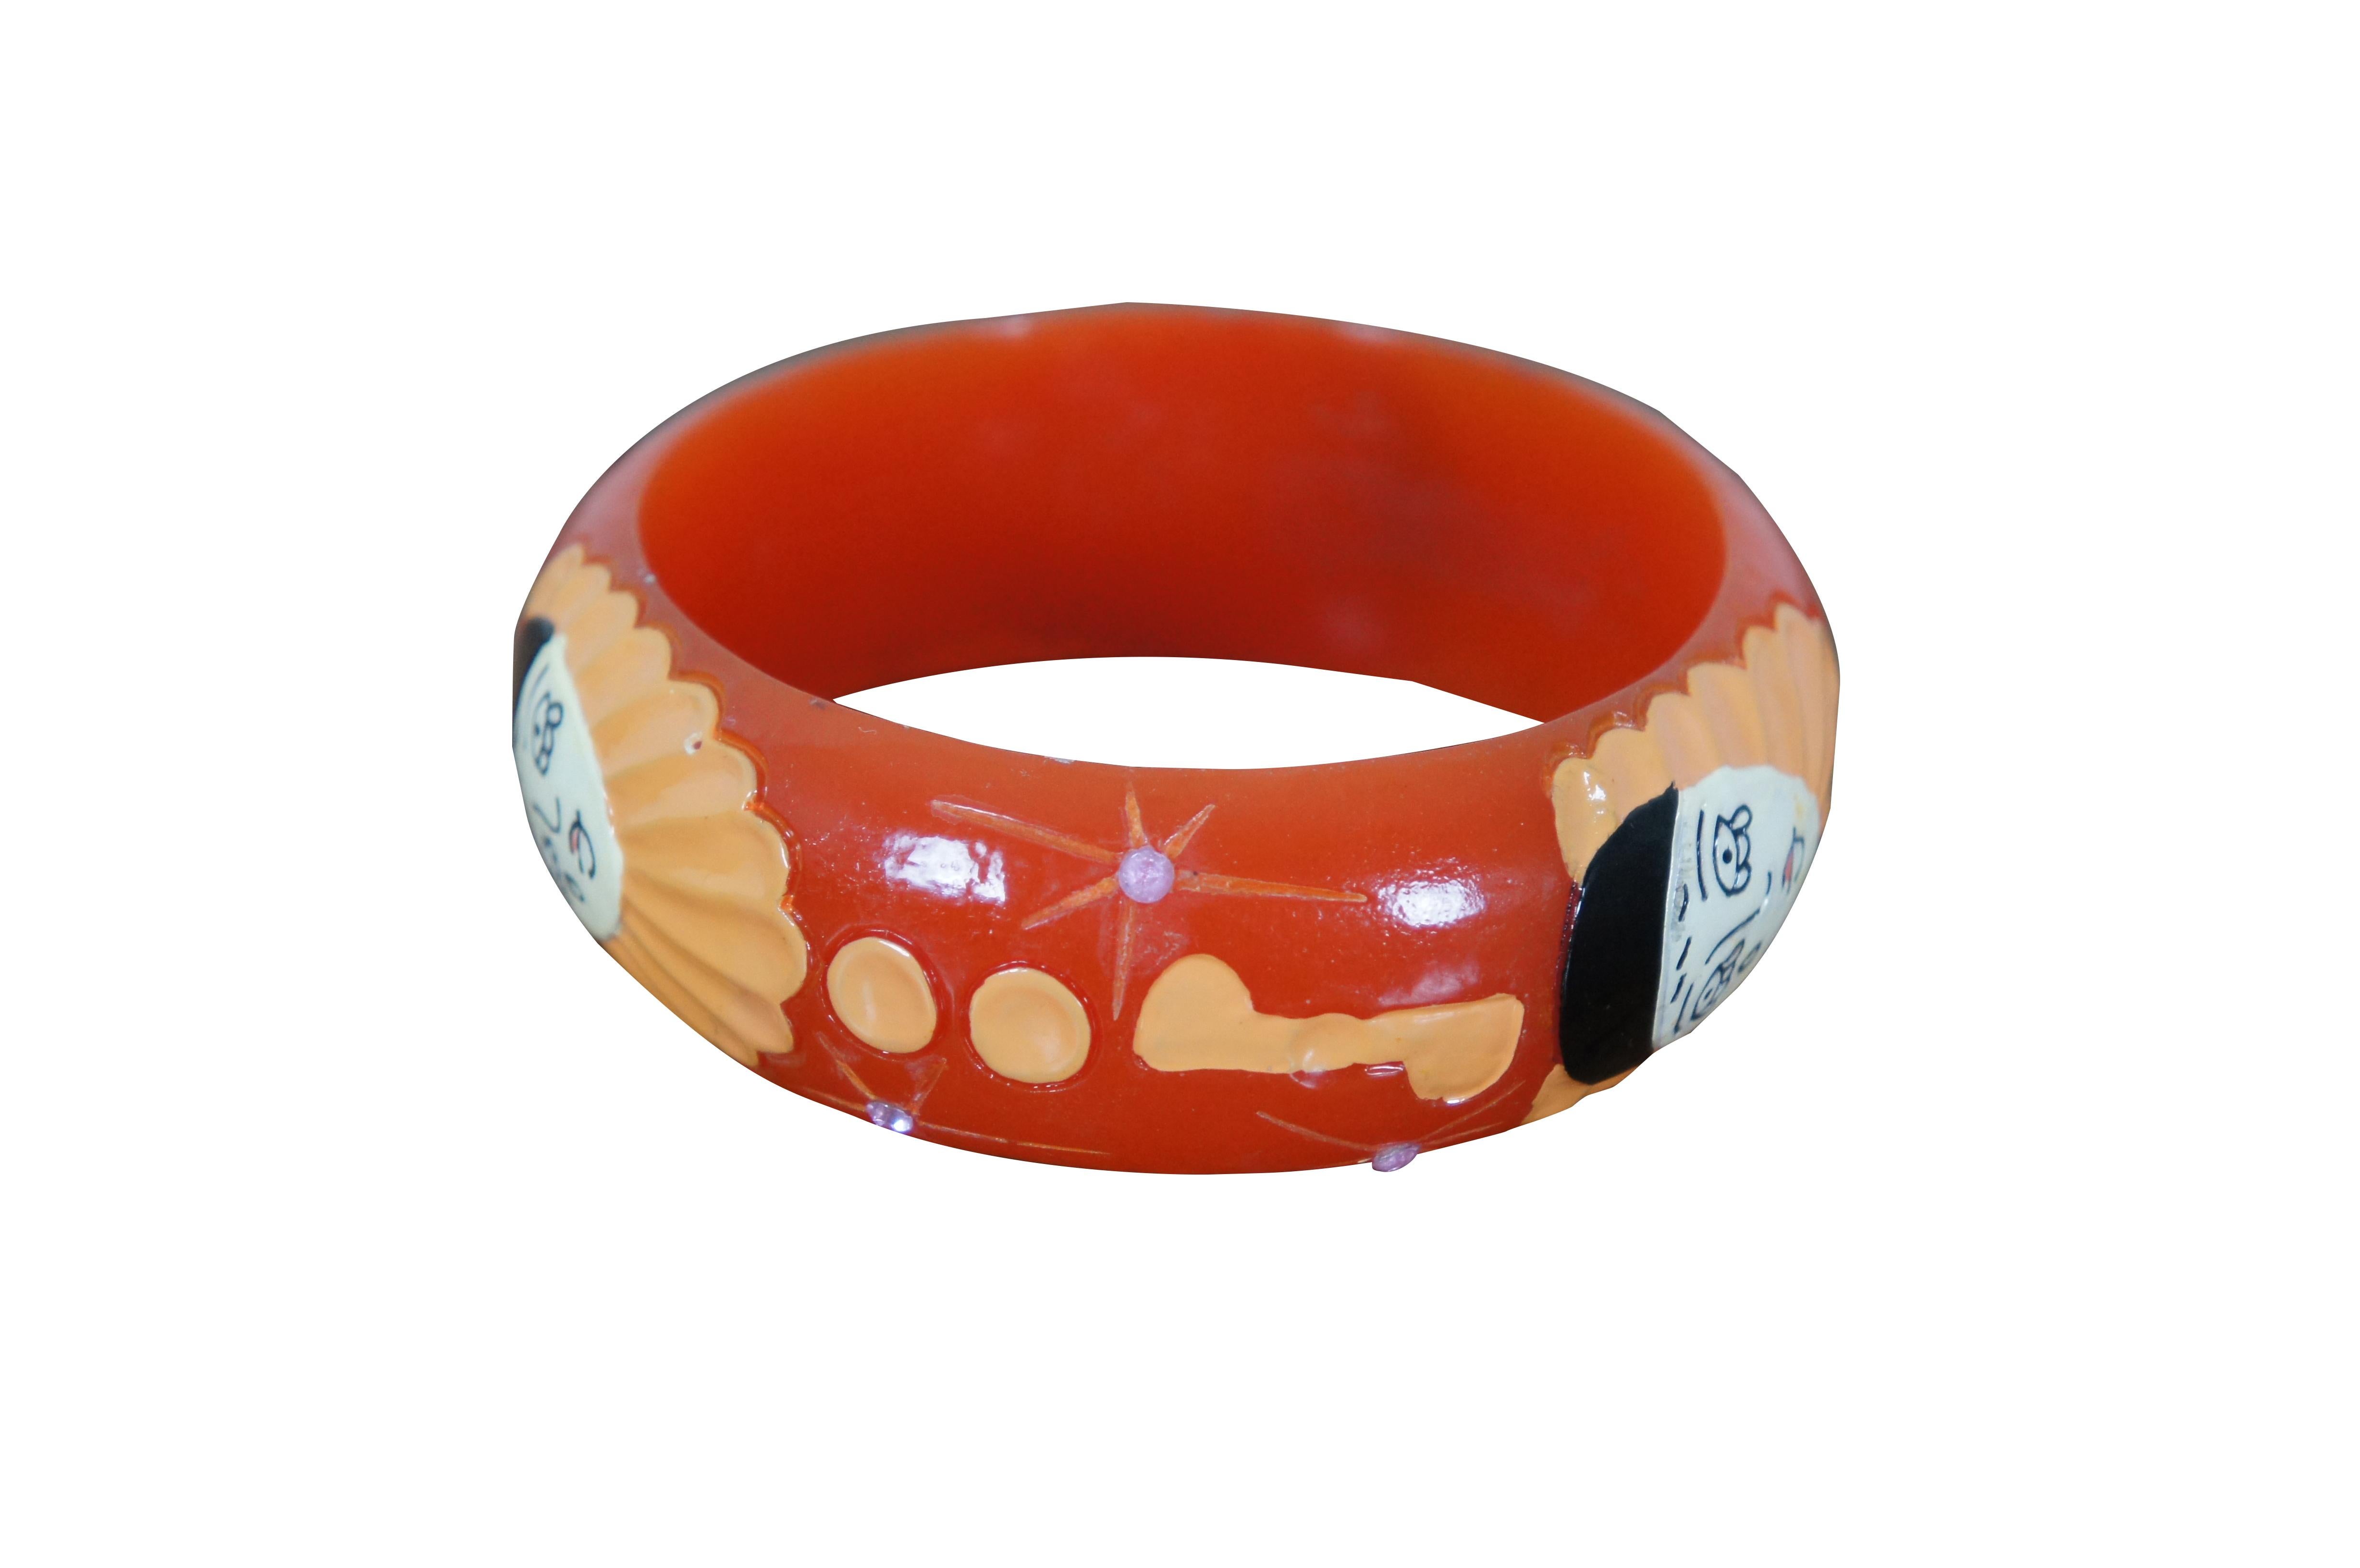 Vintage pumpkin orange Bakelite bangle bracelet featuring a carved and painted Pierrot (ala Commedia del Arte) faces, dots, and music notes, with a smattering to stars studded with white rhinestones. Butler & Wilson Galalith bangle design, inspired